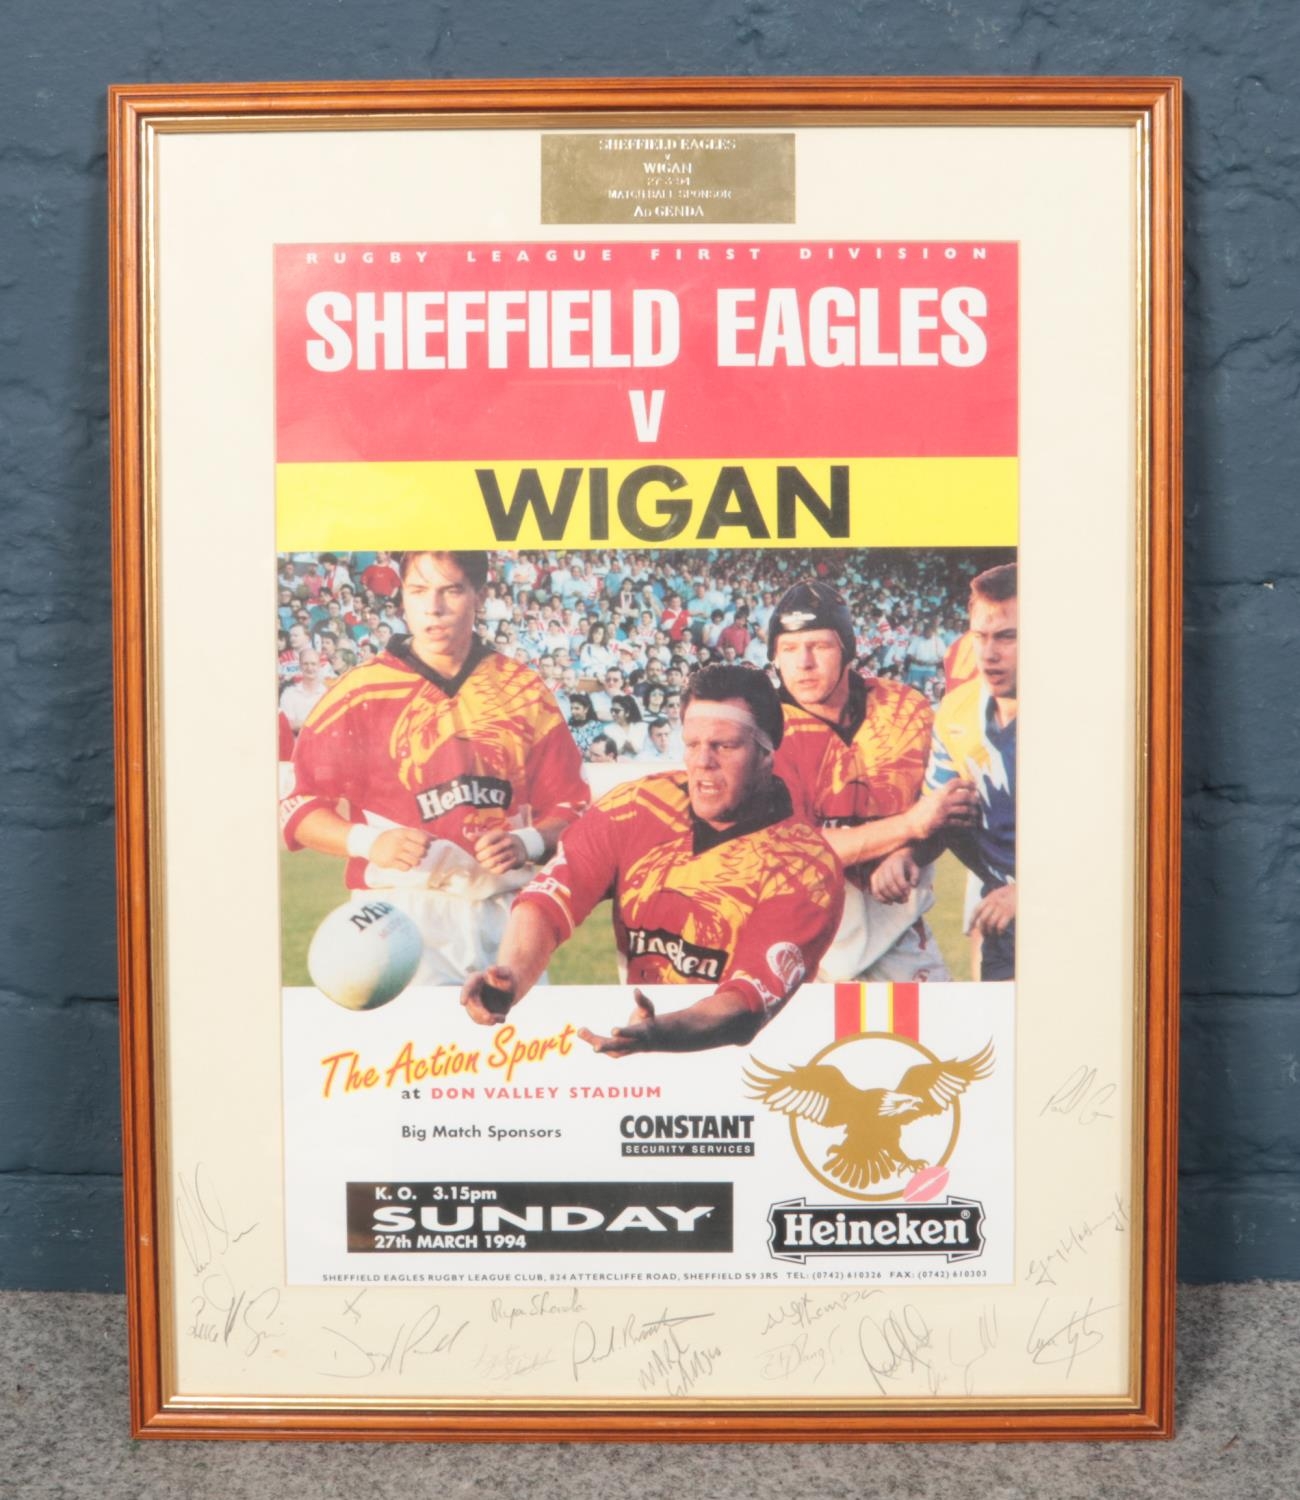 A Sheffield Eagles Rugby League Club Signed framed Poster. Sheffield Eagles v Wigan 27.3.94 Match